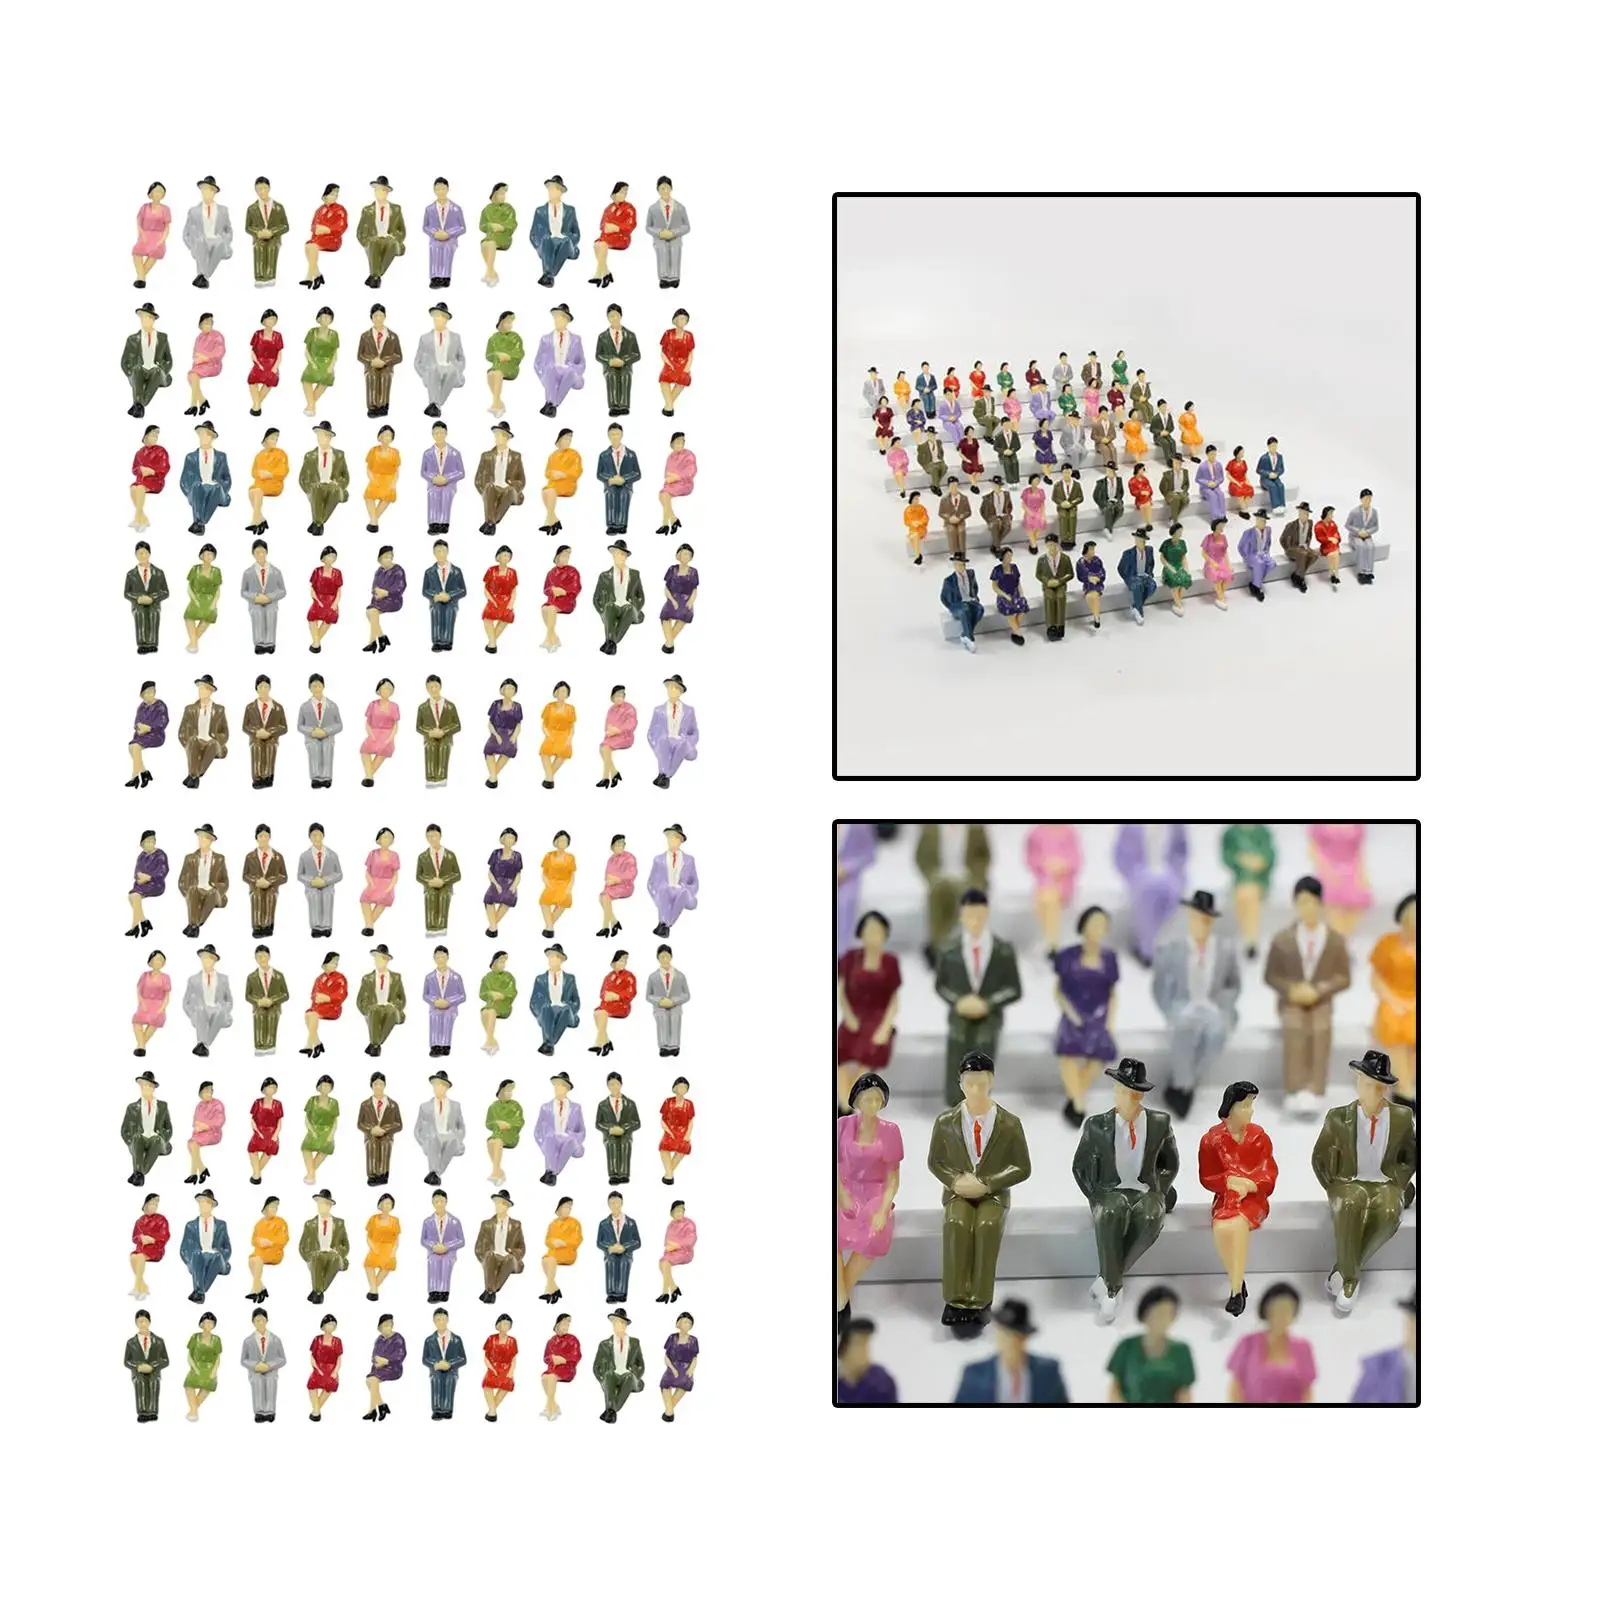 100 Pieces 1/30 Scale Small Figure Handpainted Playset Miniature People for Model Train Station Platform Layout Accessories